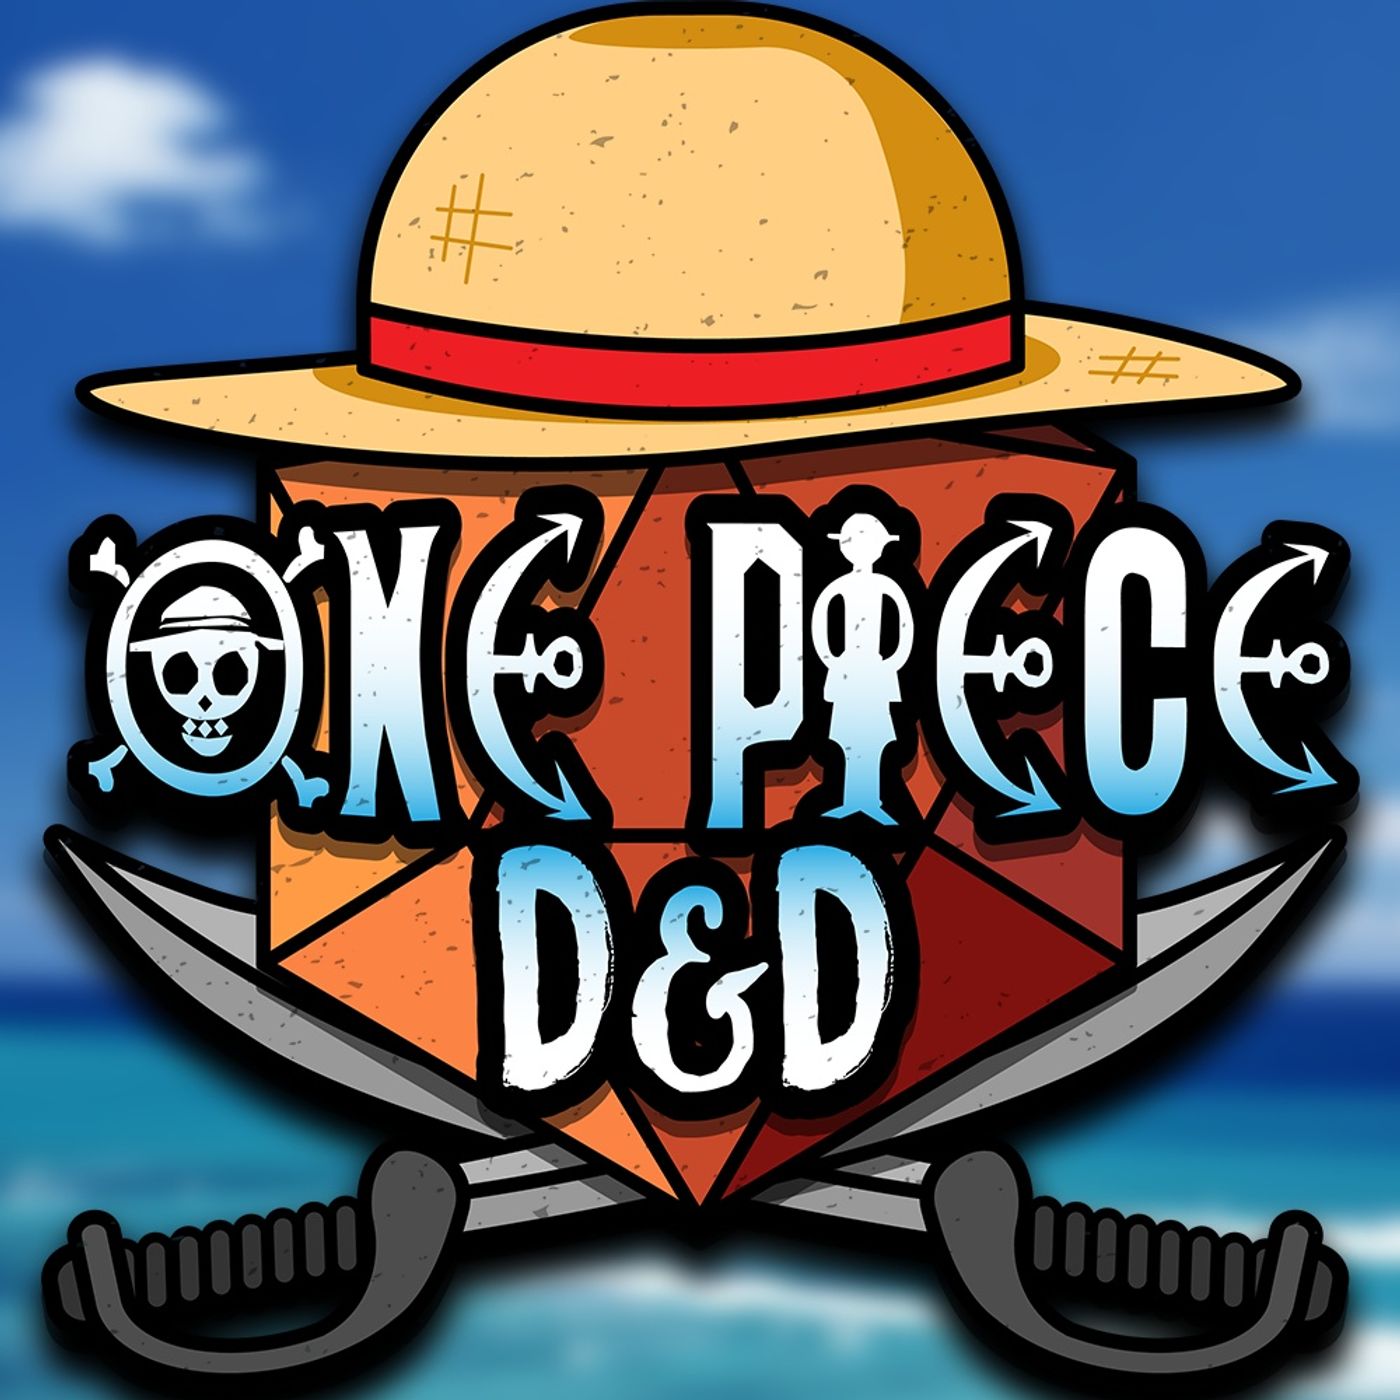 ONE PIECE D&D THE MOVIE | "Lost In The Crystal Lagoon"